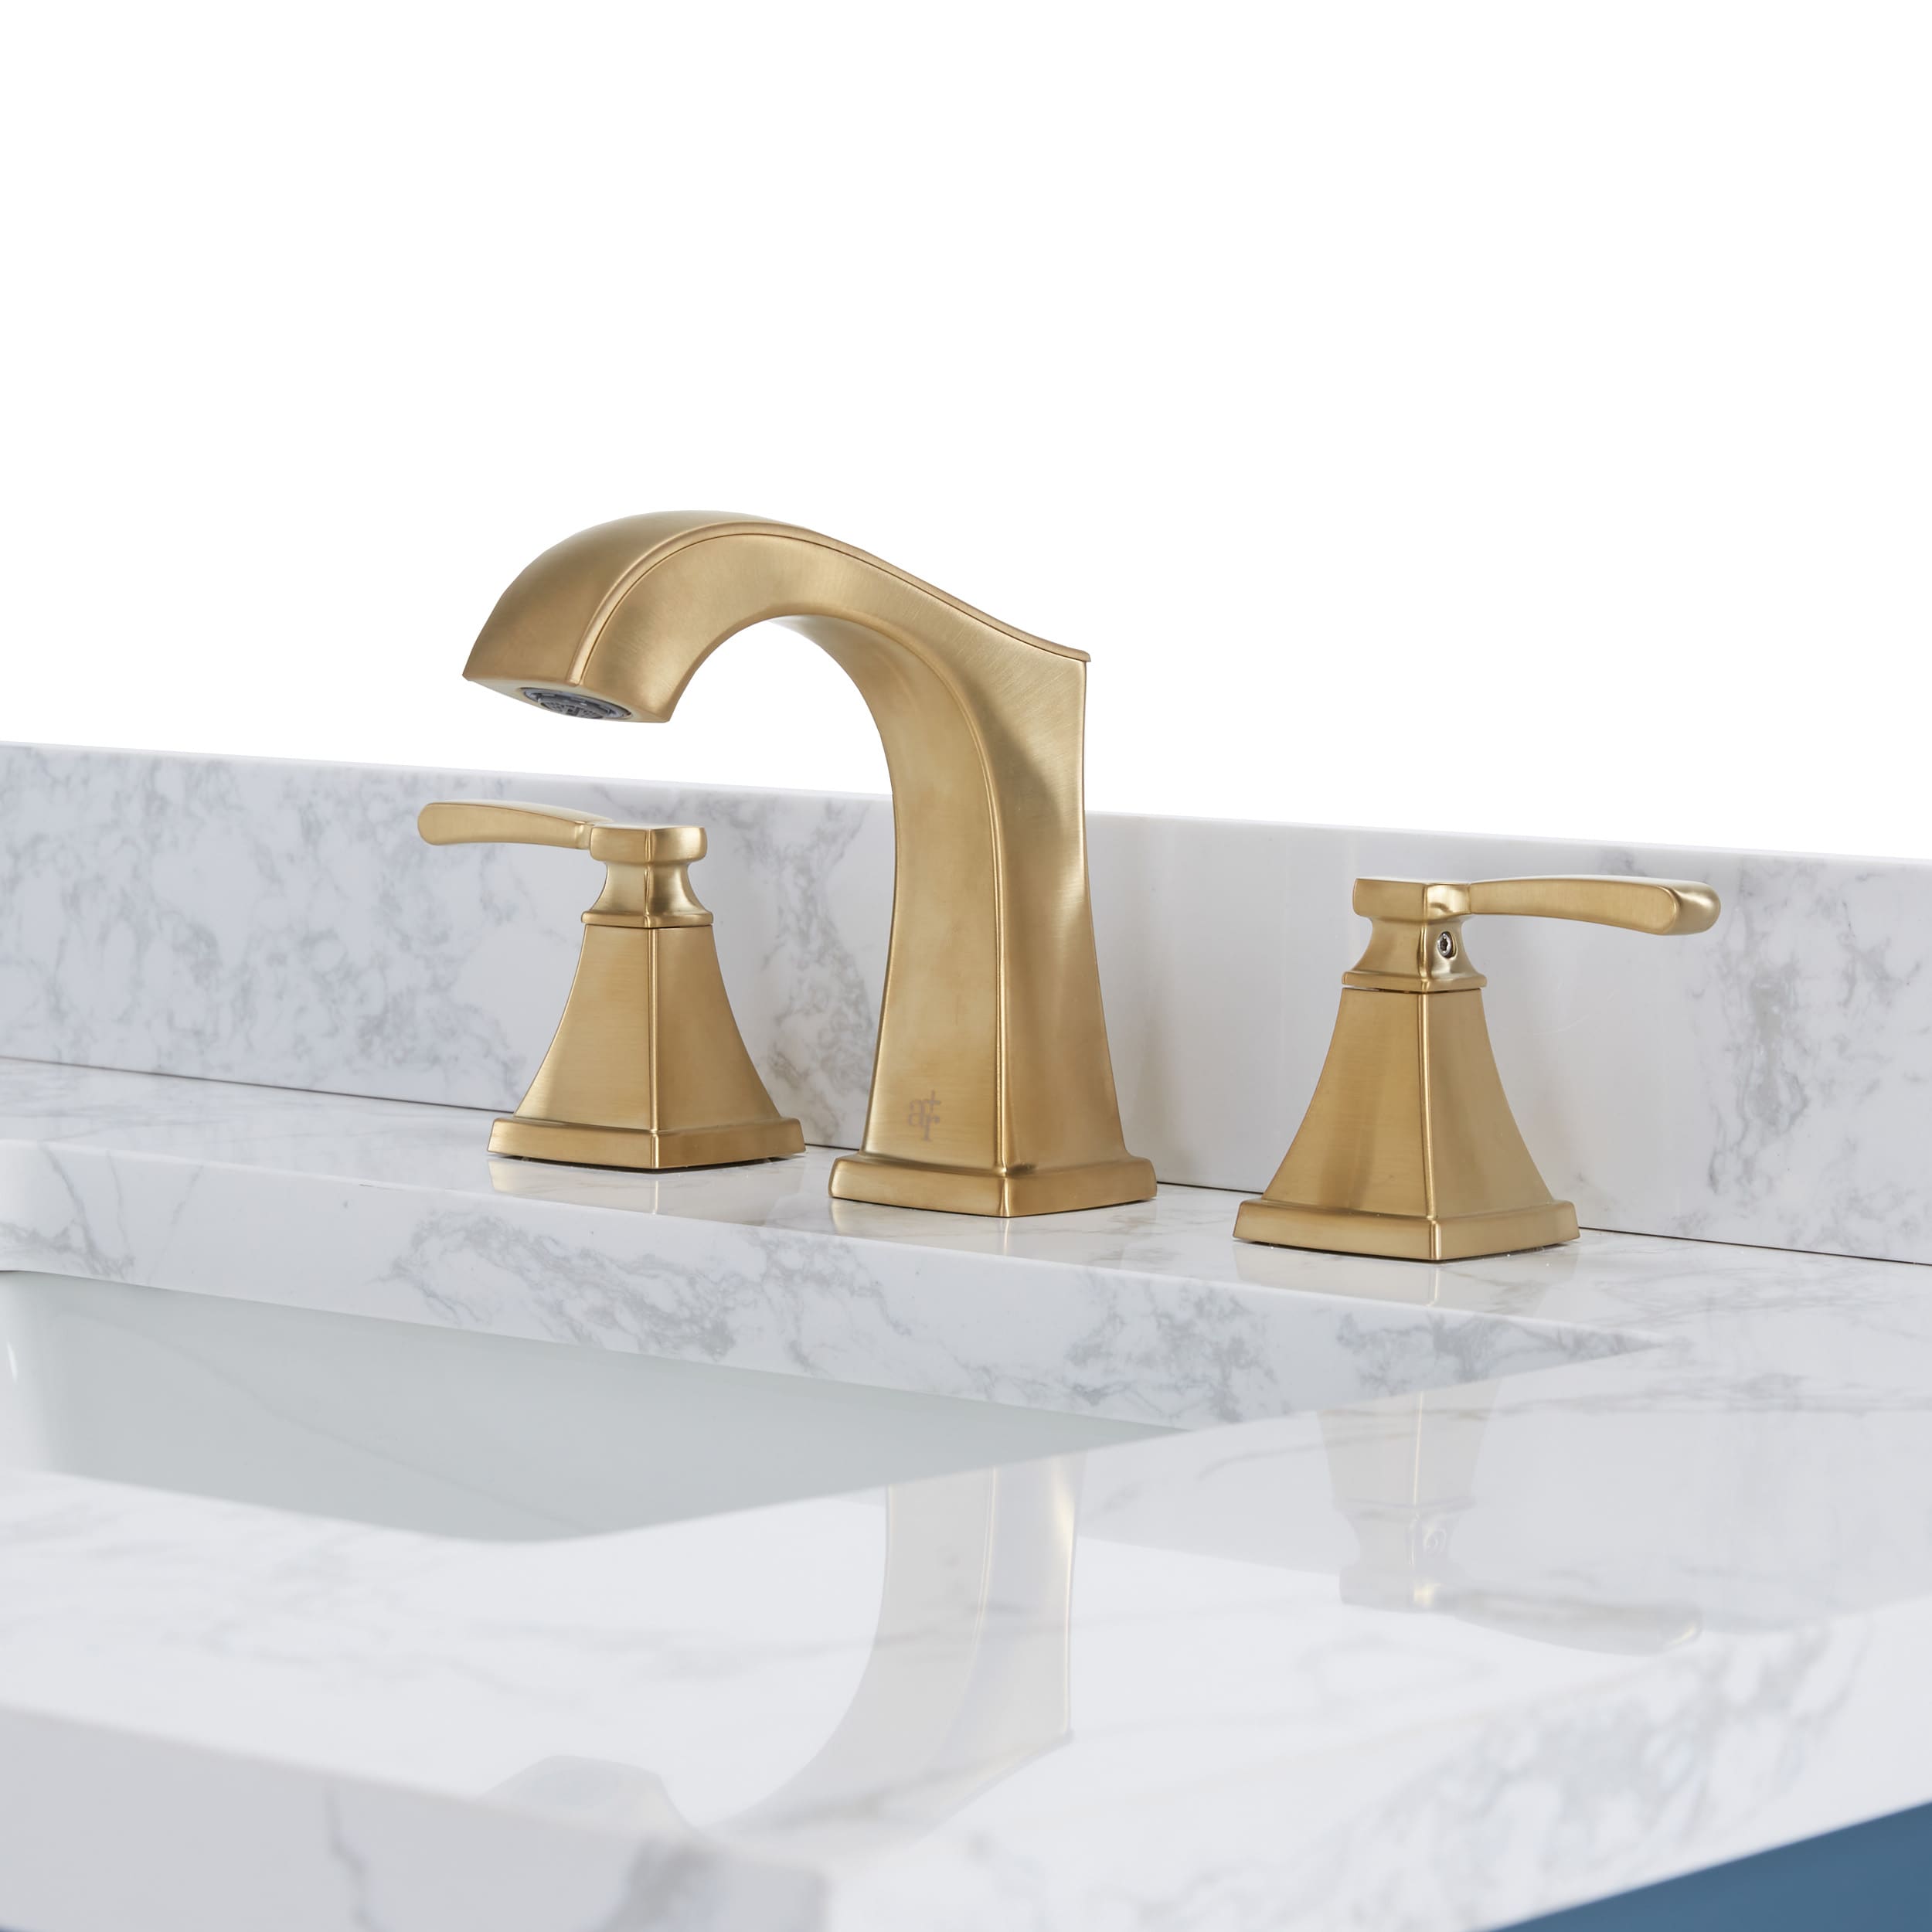 allen + roth Chesler Brushed Gold Widespread 2-Handle WaterSense Bathroom Sink Faucet with Drain